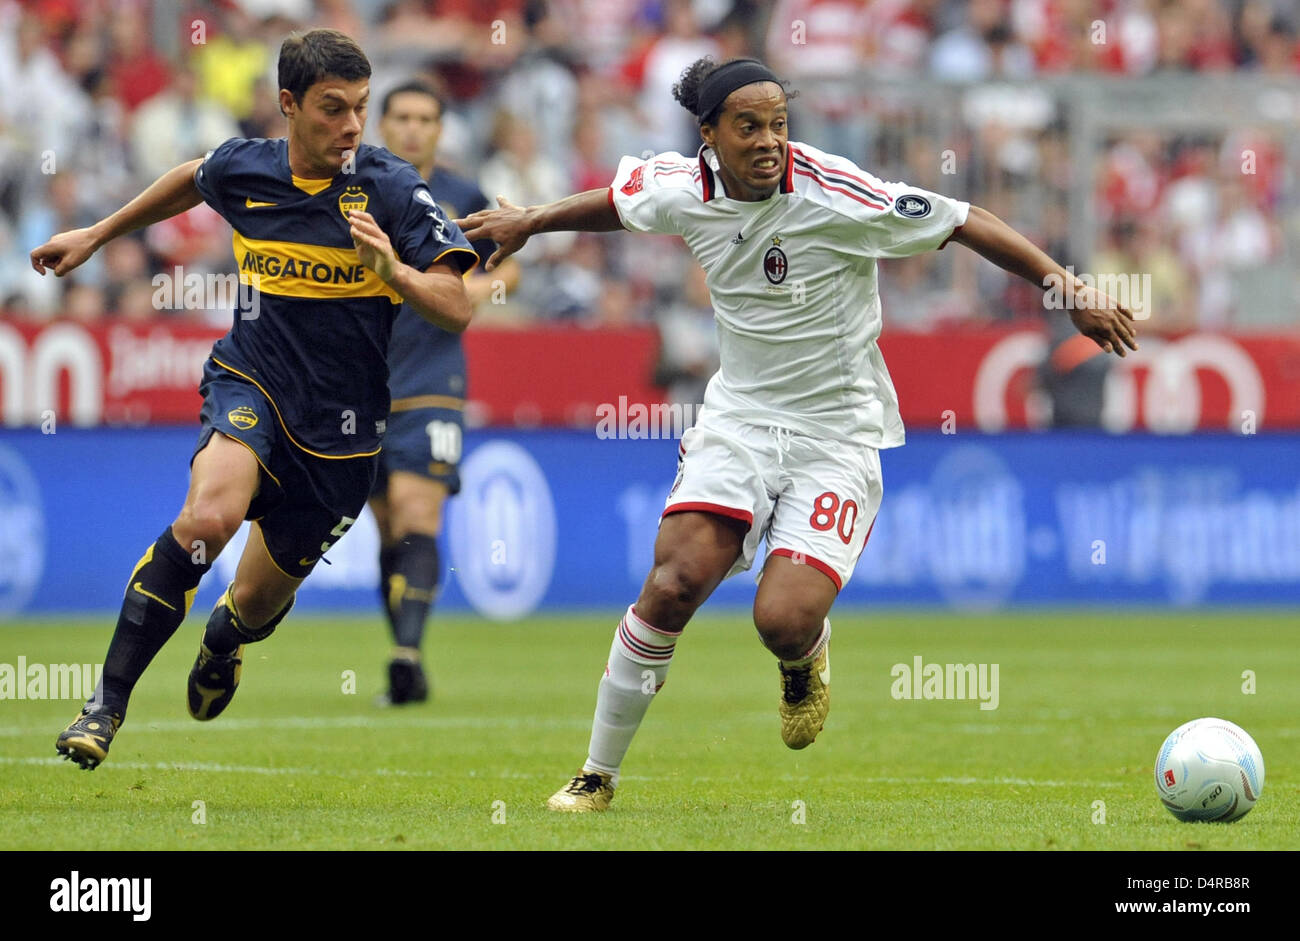 AC Milan?s Ronaldinho (R) vies for the ball with Boca Juniors? Sebastian Battaglia during the match AC Milan vs Boca Juniors Buenos Aires at the Audi Cup 2009 at Allianz Arena stadium in Munich, Germany, 30 July 2009. Photo: Andreas Gebert Stock Photo